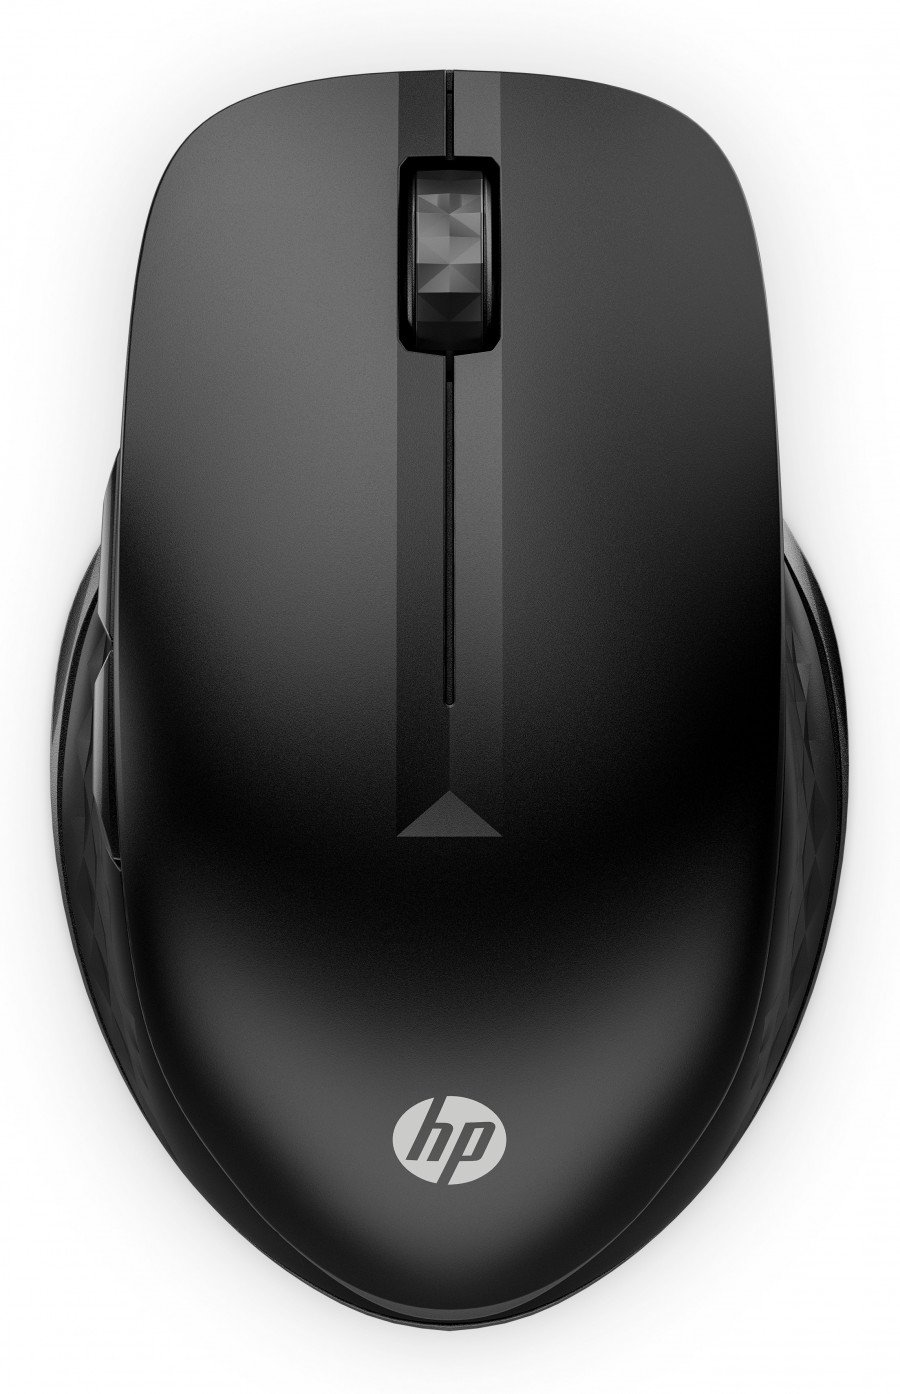 Image of Hp hewlett packard mouse wireless multi-dispositivo hp 430 Mouse wireless multi-dispositivo HP 430 Componenti Informatica